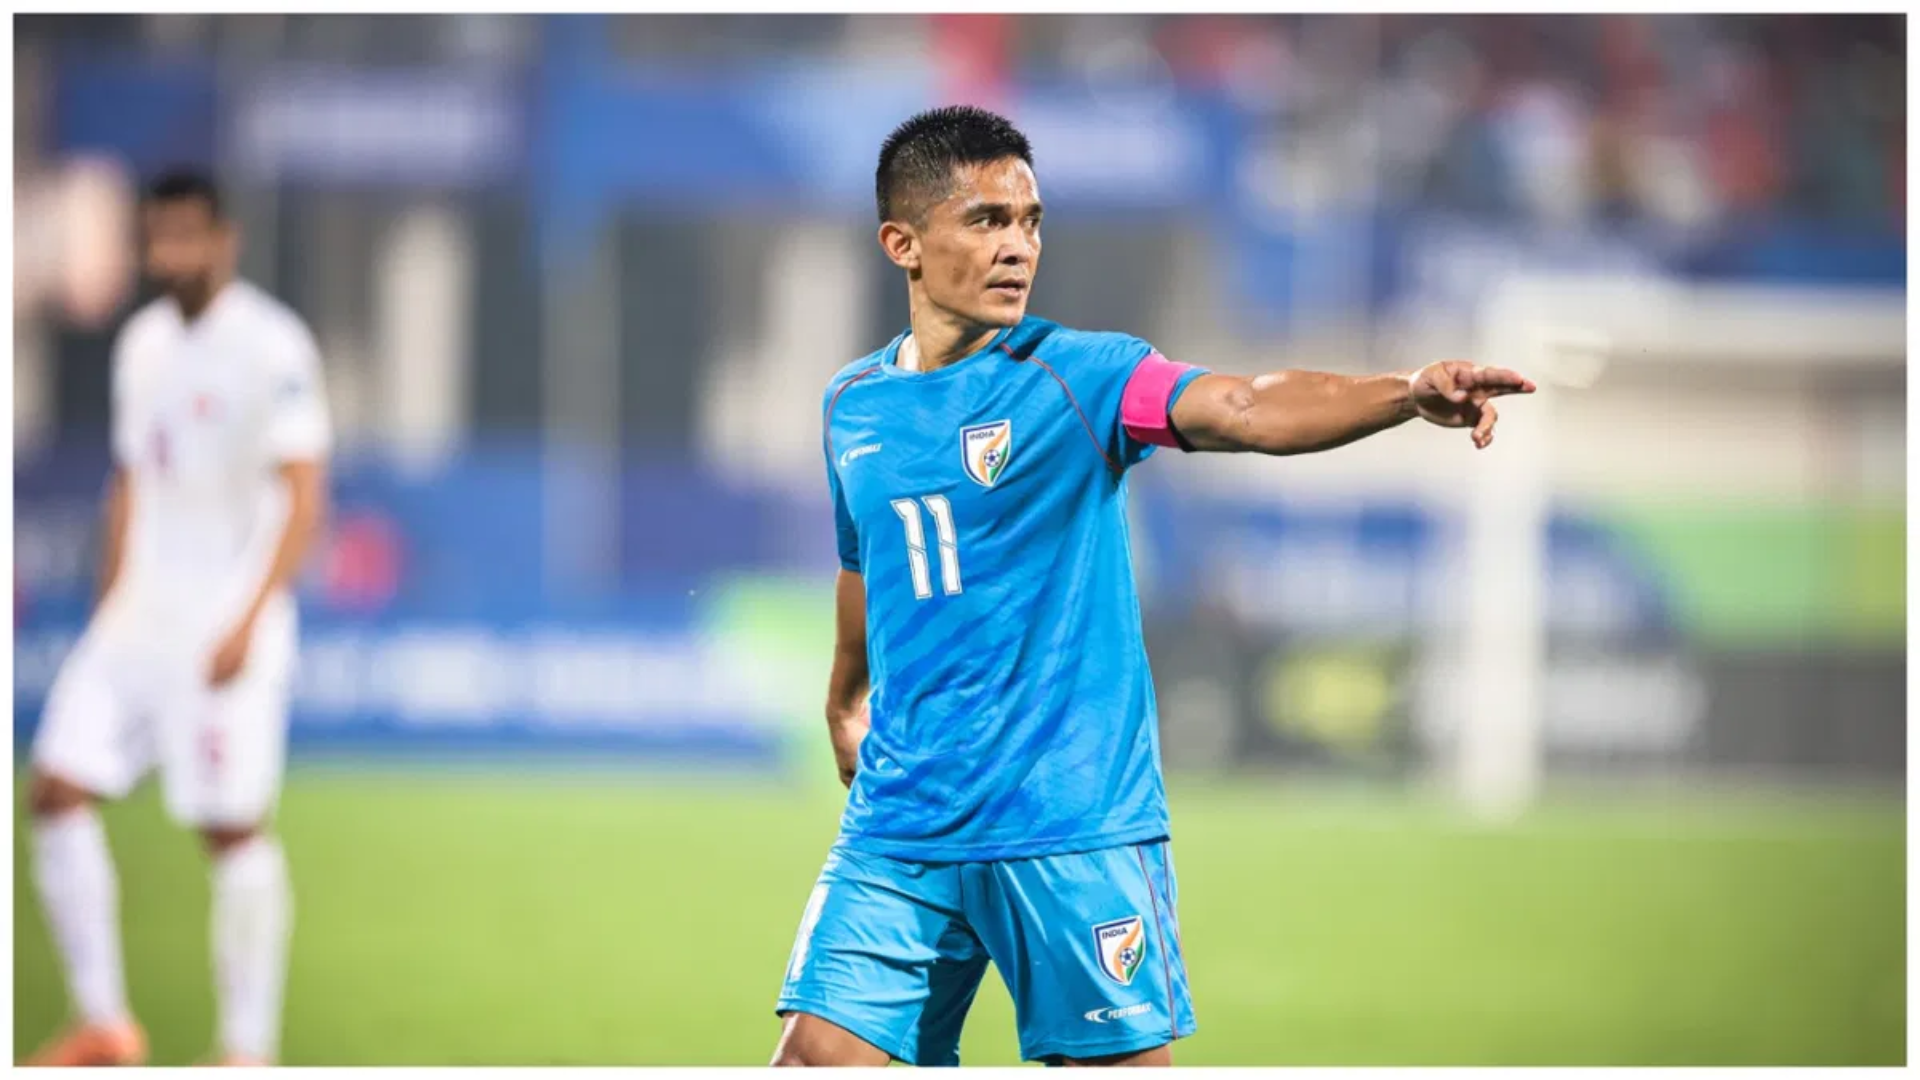 Sunil Chhetri Hopes For All Can Go Happy In Last India Game on June 6